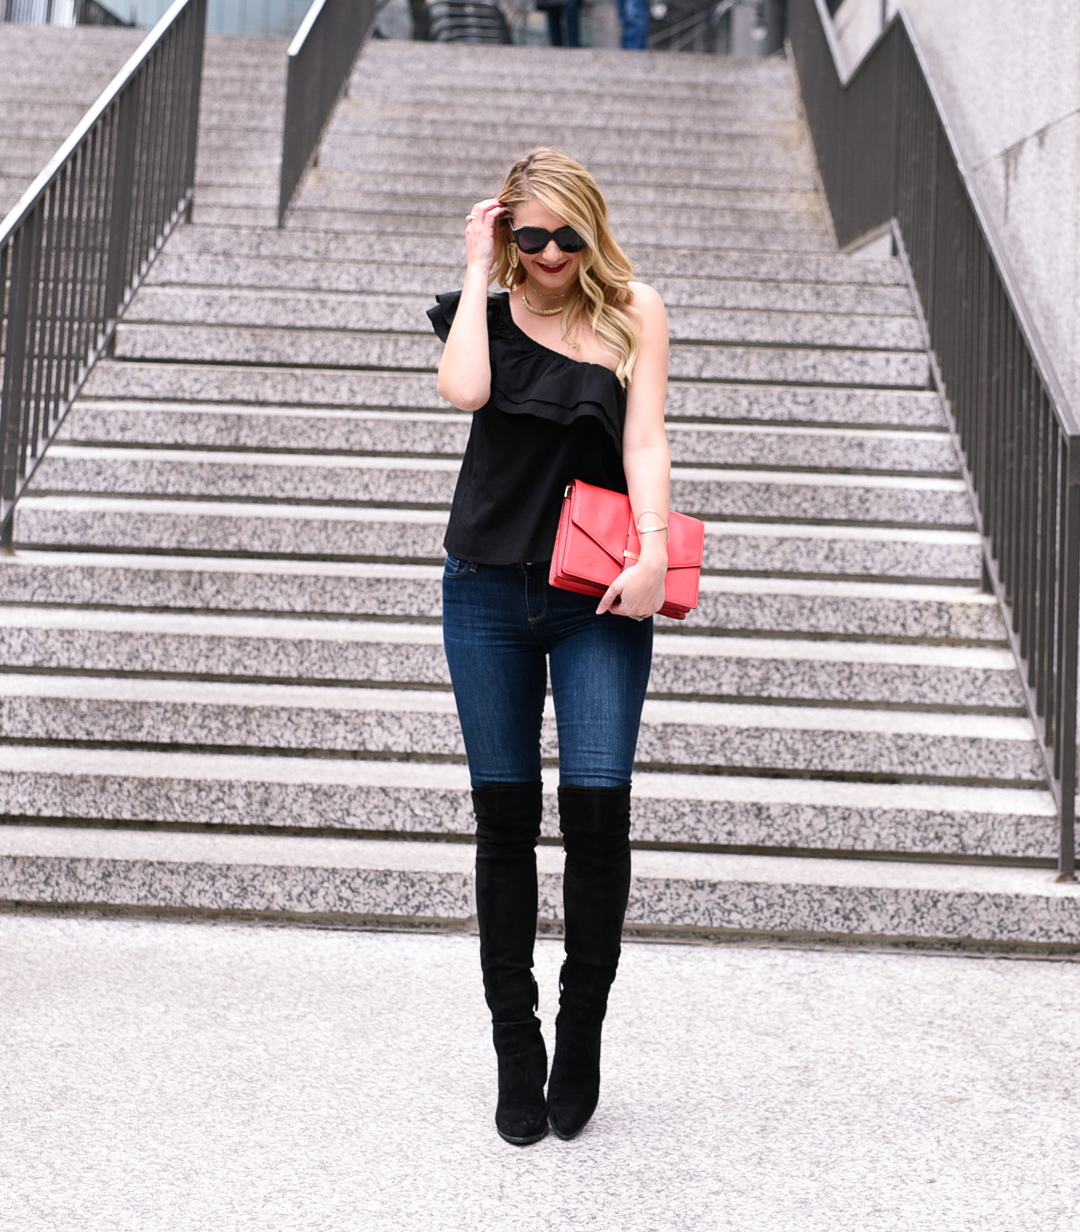 Jenna Colgrove wearing a Sincerely Jules One Shoulder Ruffle top in black with suede over the knee boots. 